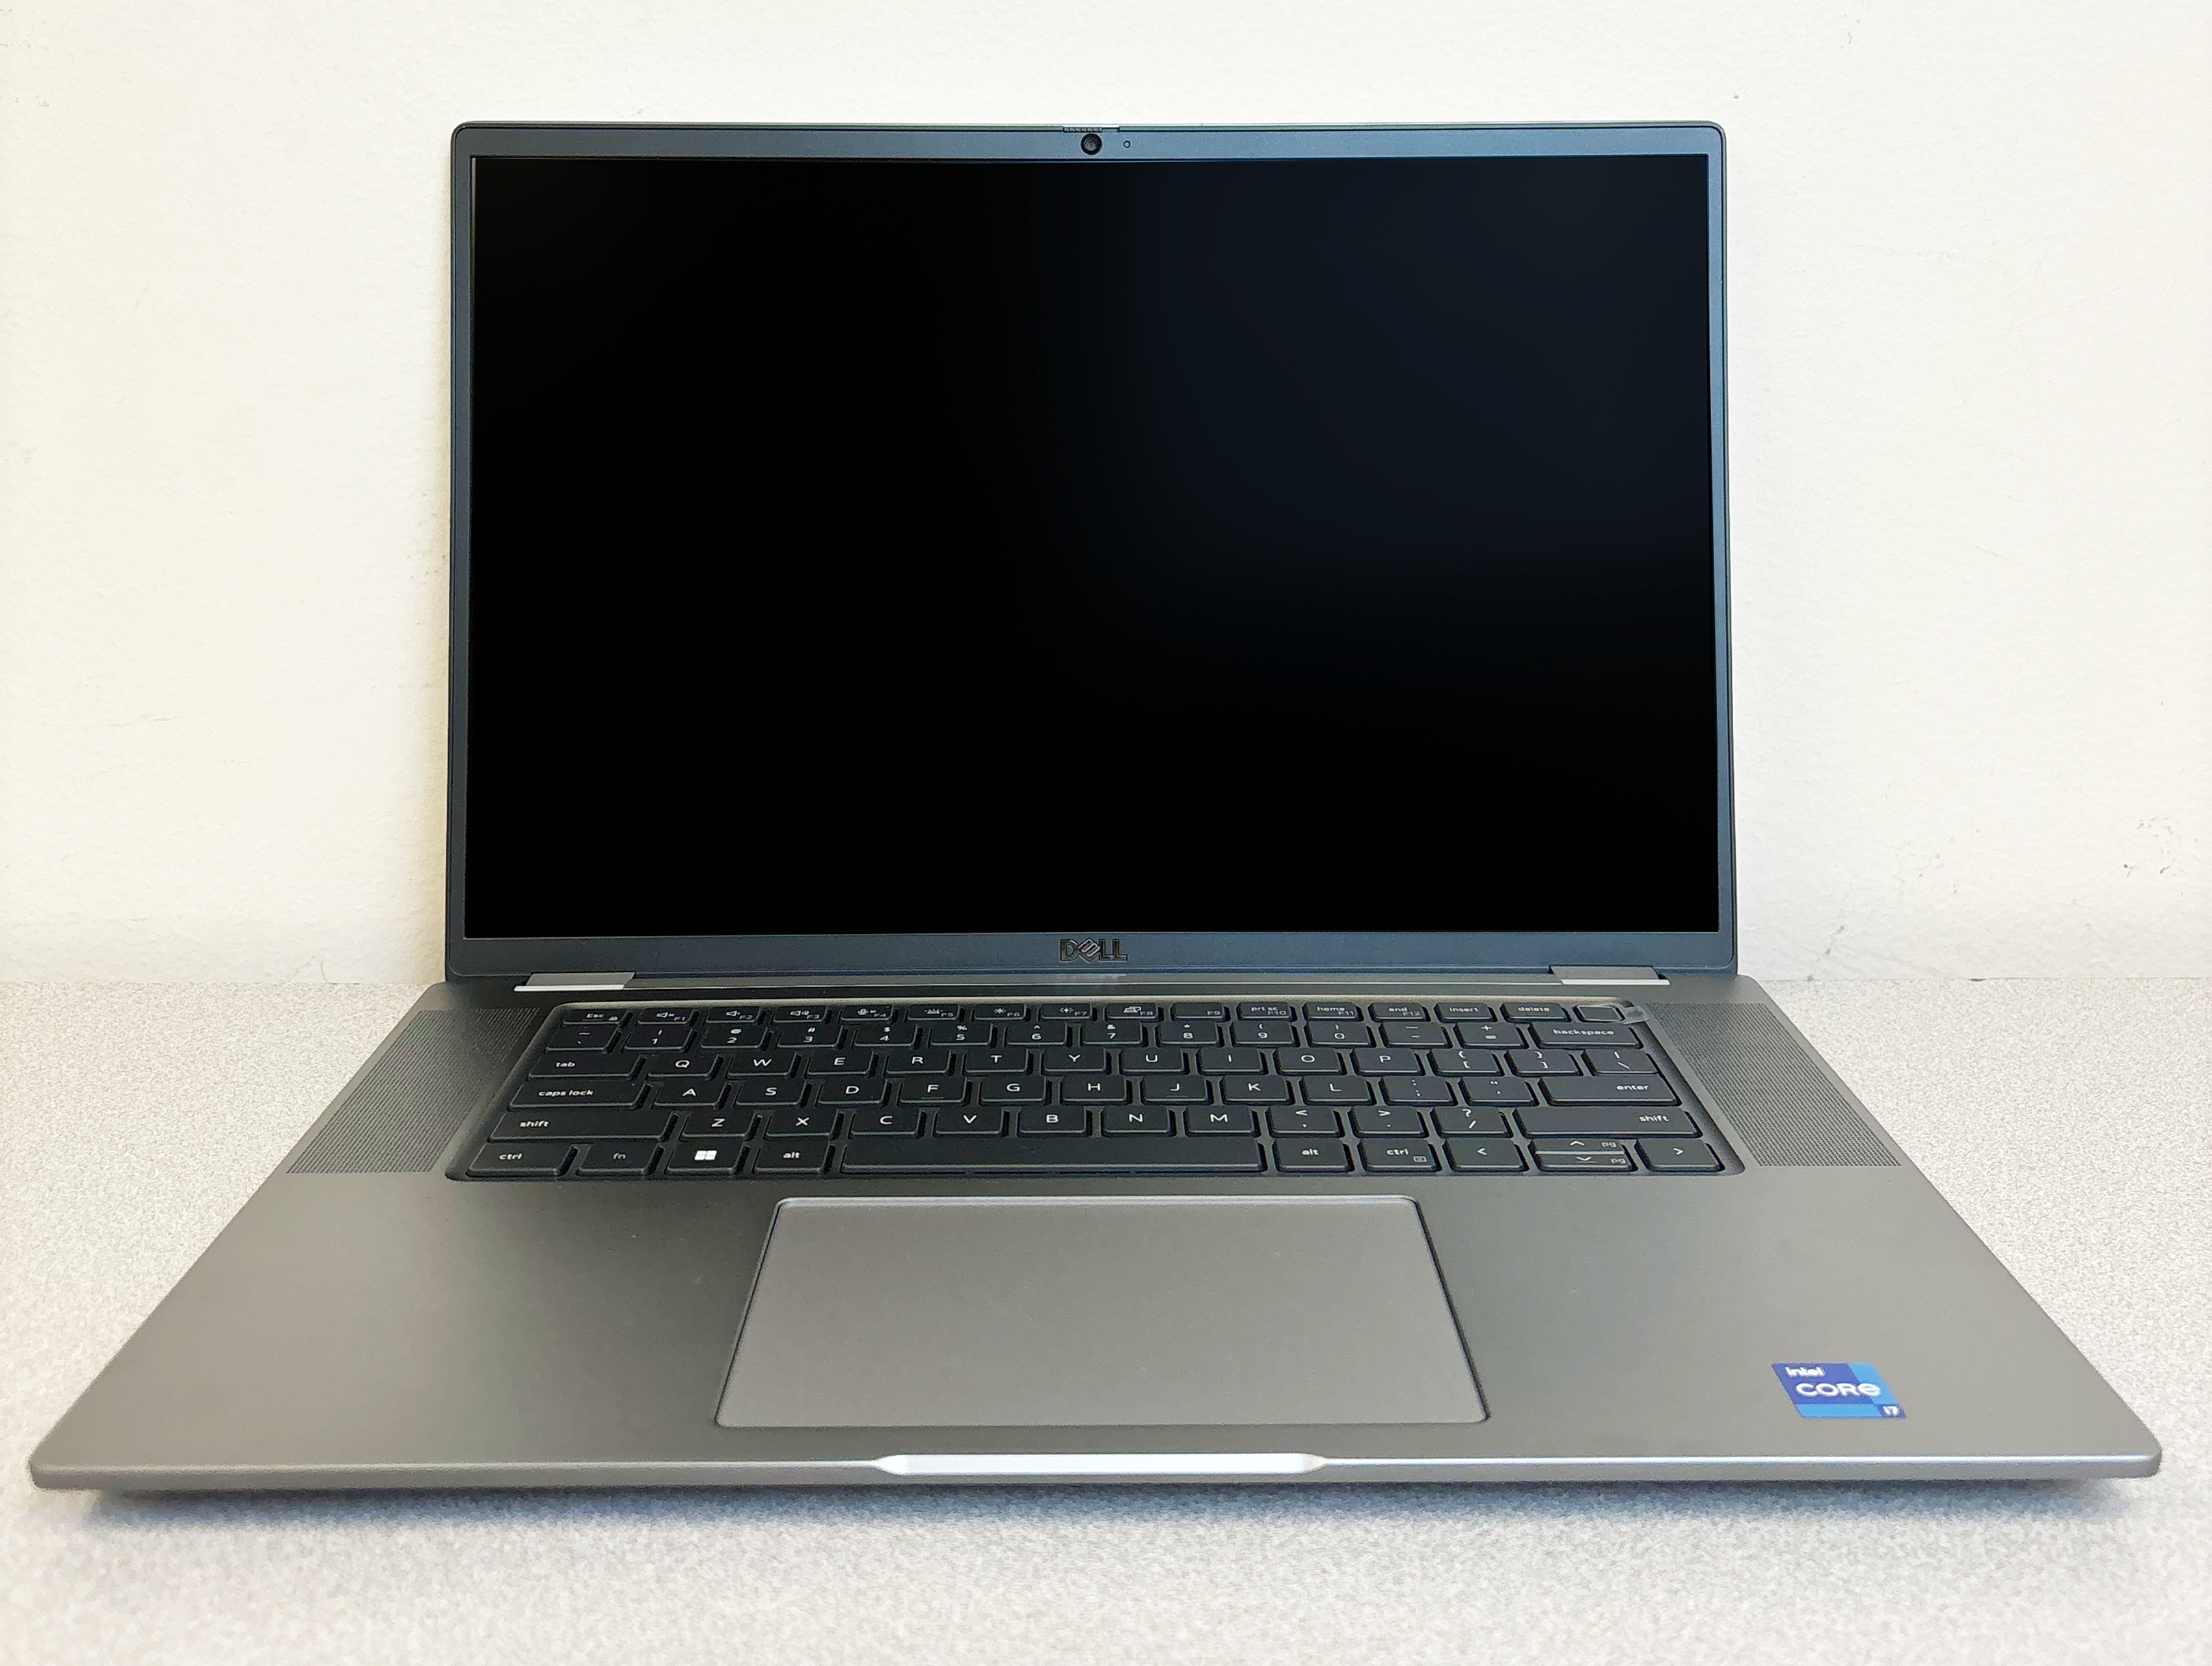 Dell Latitude frontview open